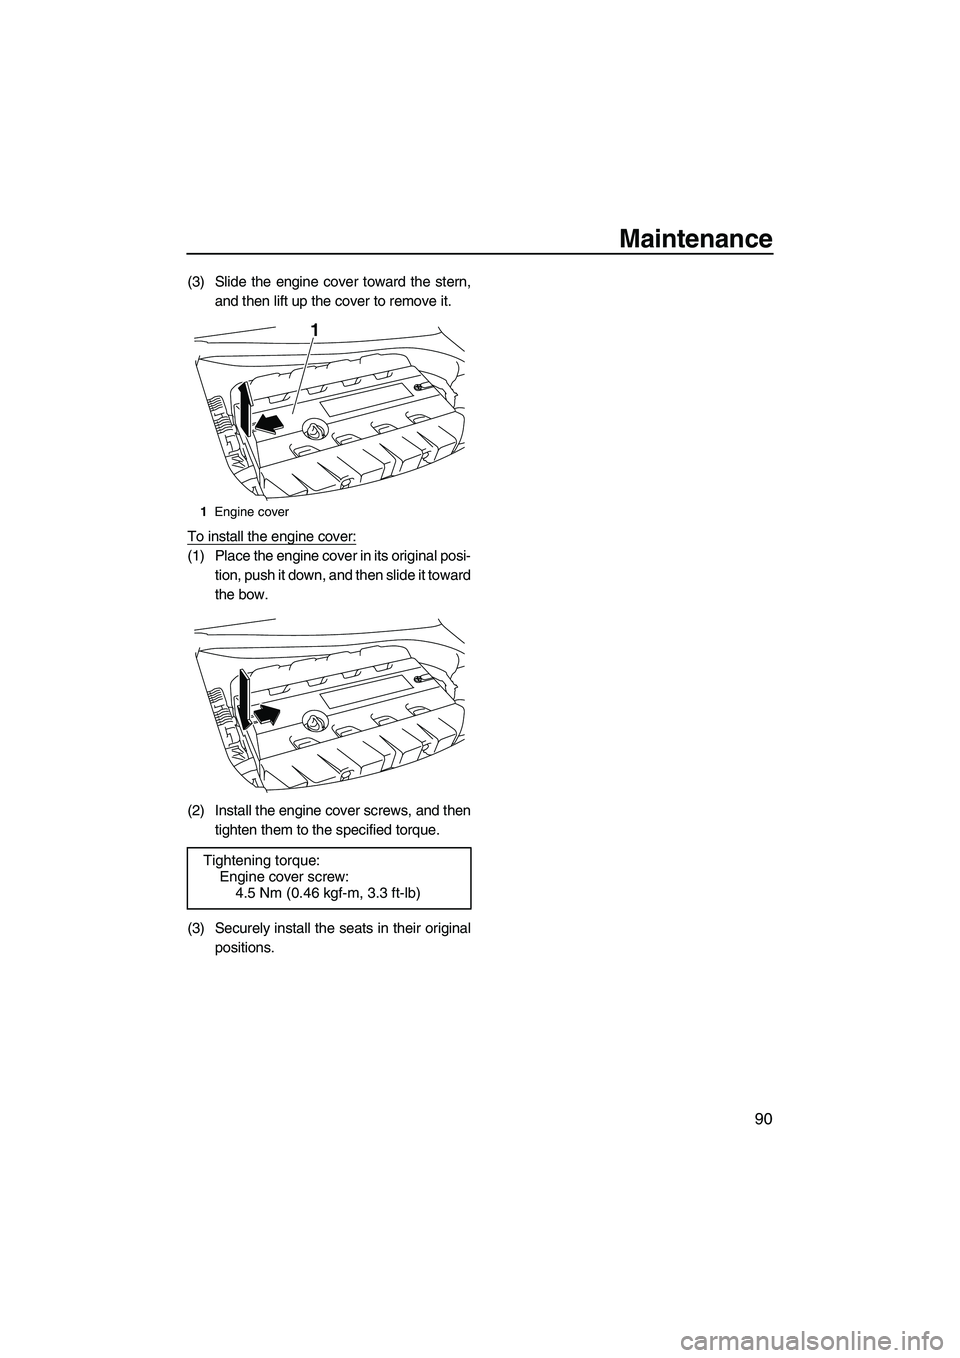 YAMAHA FX SHO 2010  Owners Manual Maintenance
90
(3) Slide the engine cover toward the stern,
and then lift up the cover to remove it.
To install the engine cover:
(1) Place the engine cover in its original posi-
tion, push it down, a